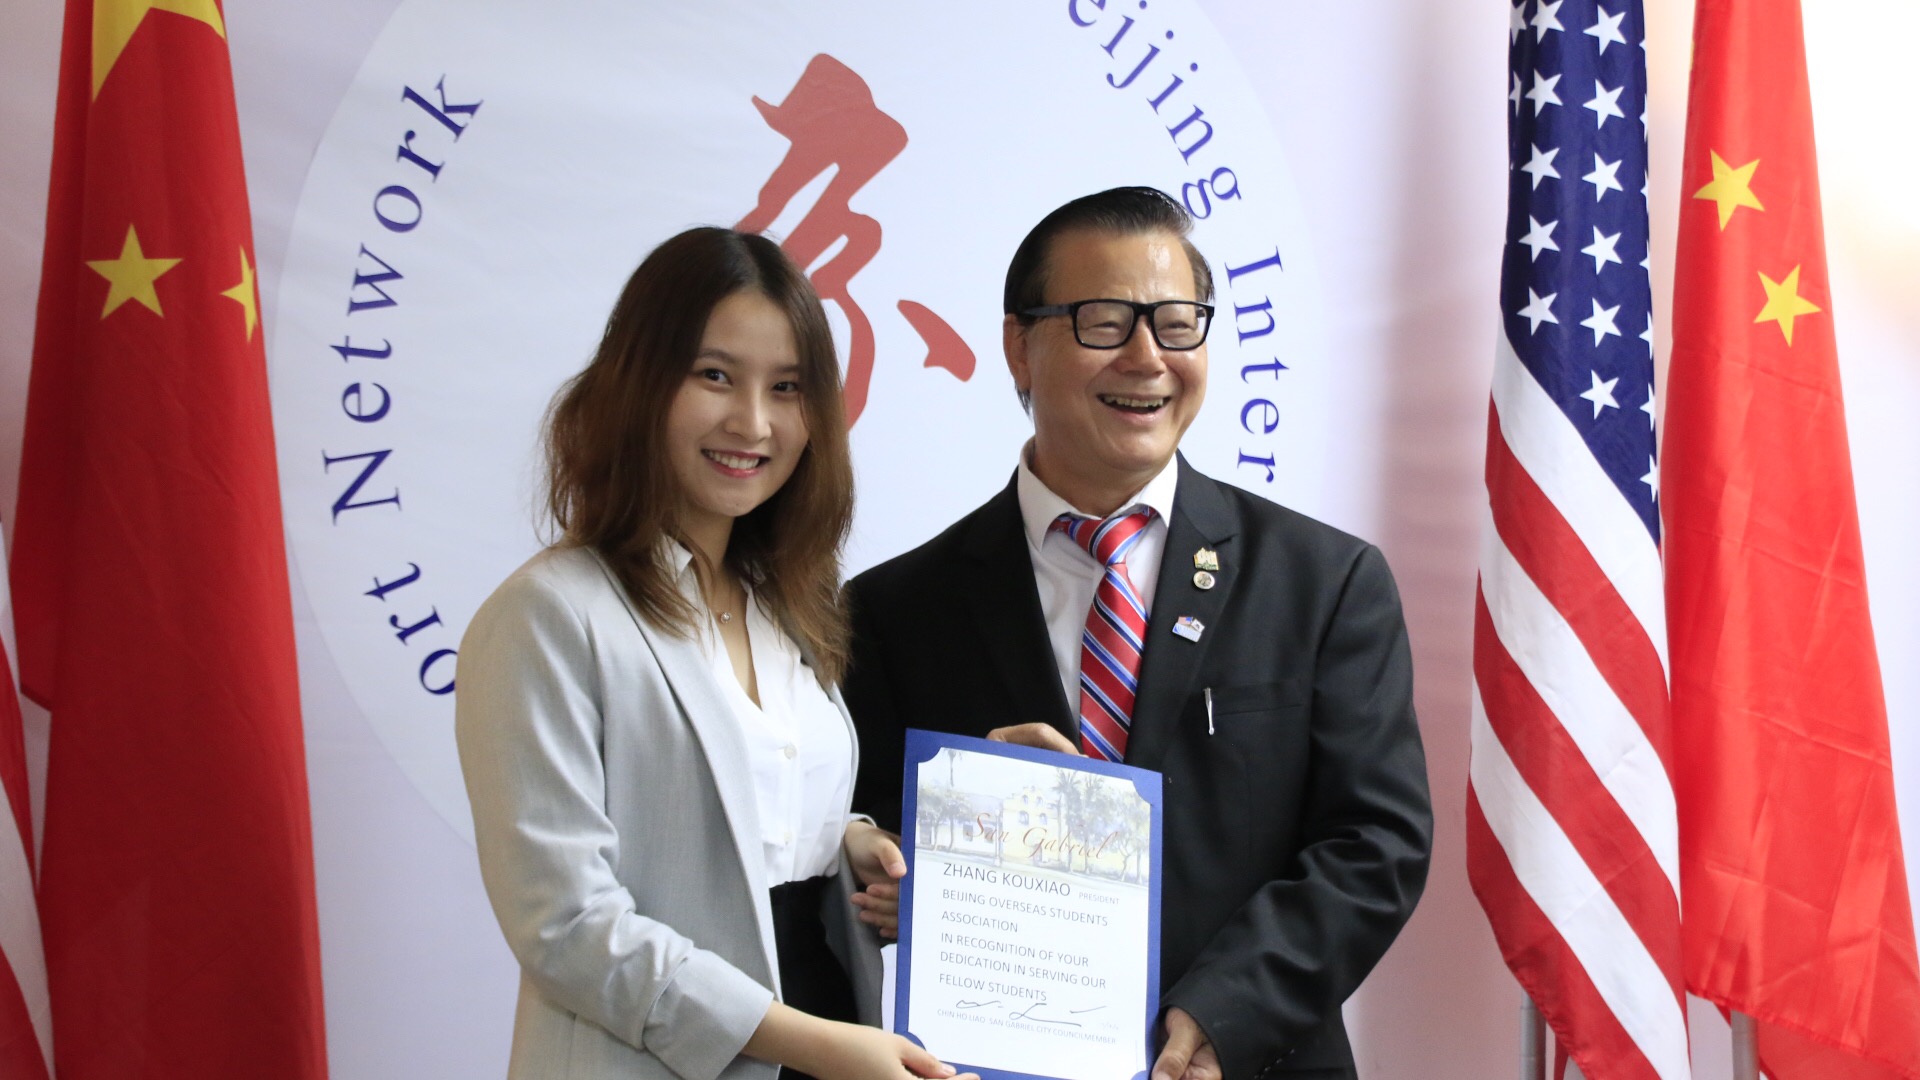 Zhangkouxiao Appointed As the Chairman of The American Beijing International Students Association